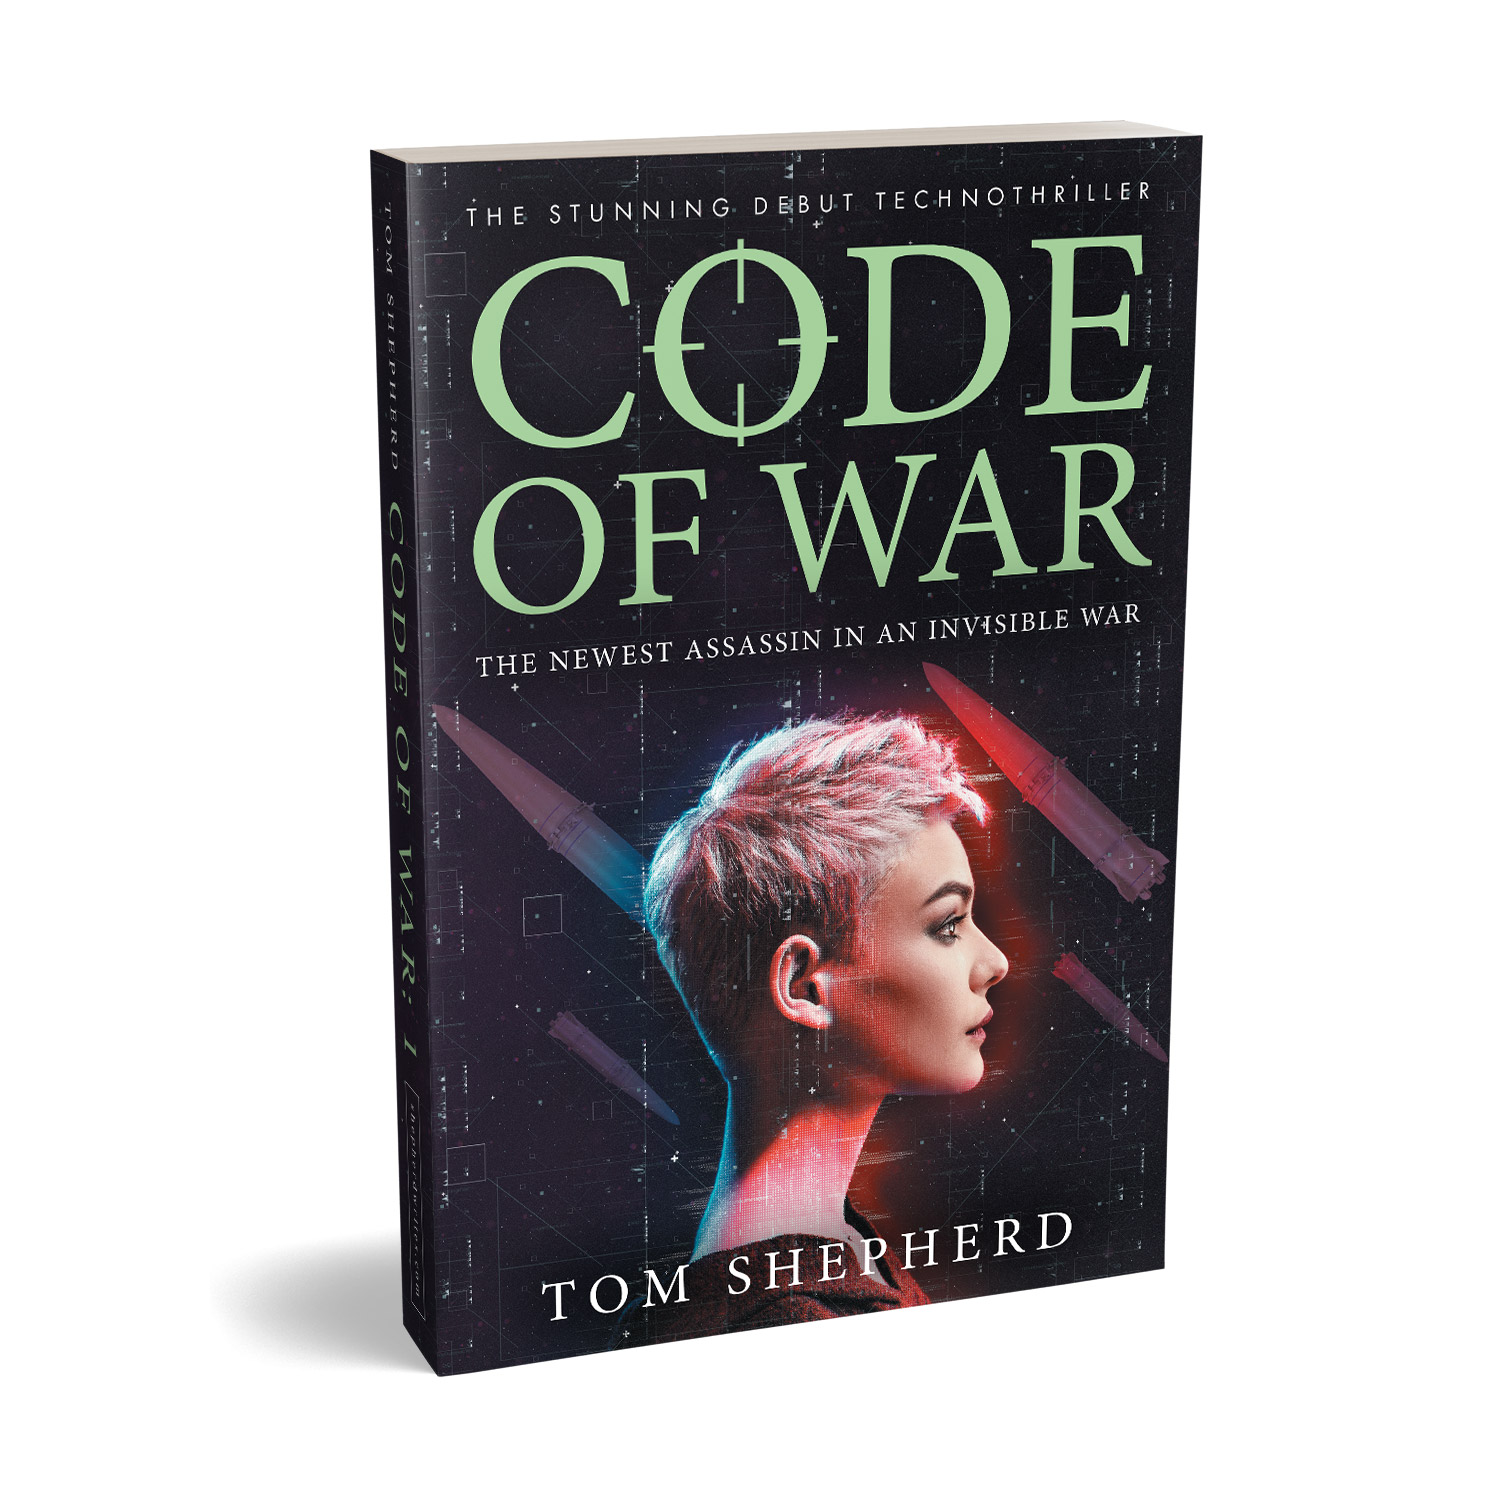 'Code of War' is a bleeding-edge, female-led, military technothriller. The author is Tom Shepherd. The book cover design and interior formatting are by Mark Thomas. To learn more about what Mark could do for your book, please visit coverness.com.